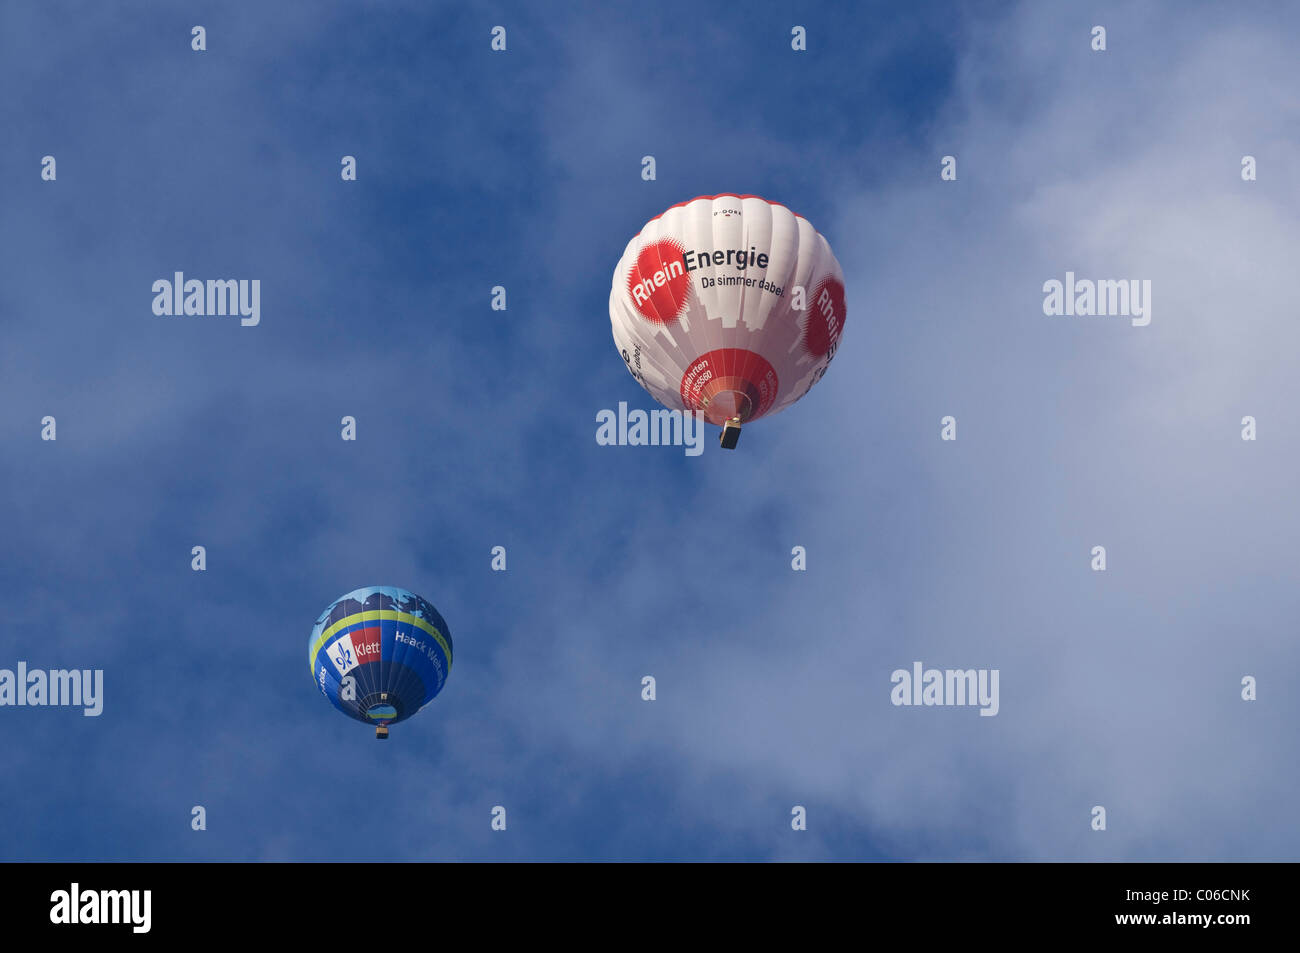 Two hot-air balloons, Klett Verlag and Rheinenergie, in front of a cloudy sky Stock Photo